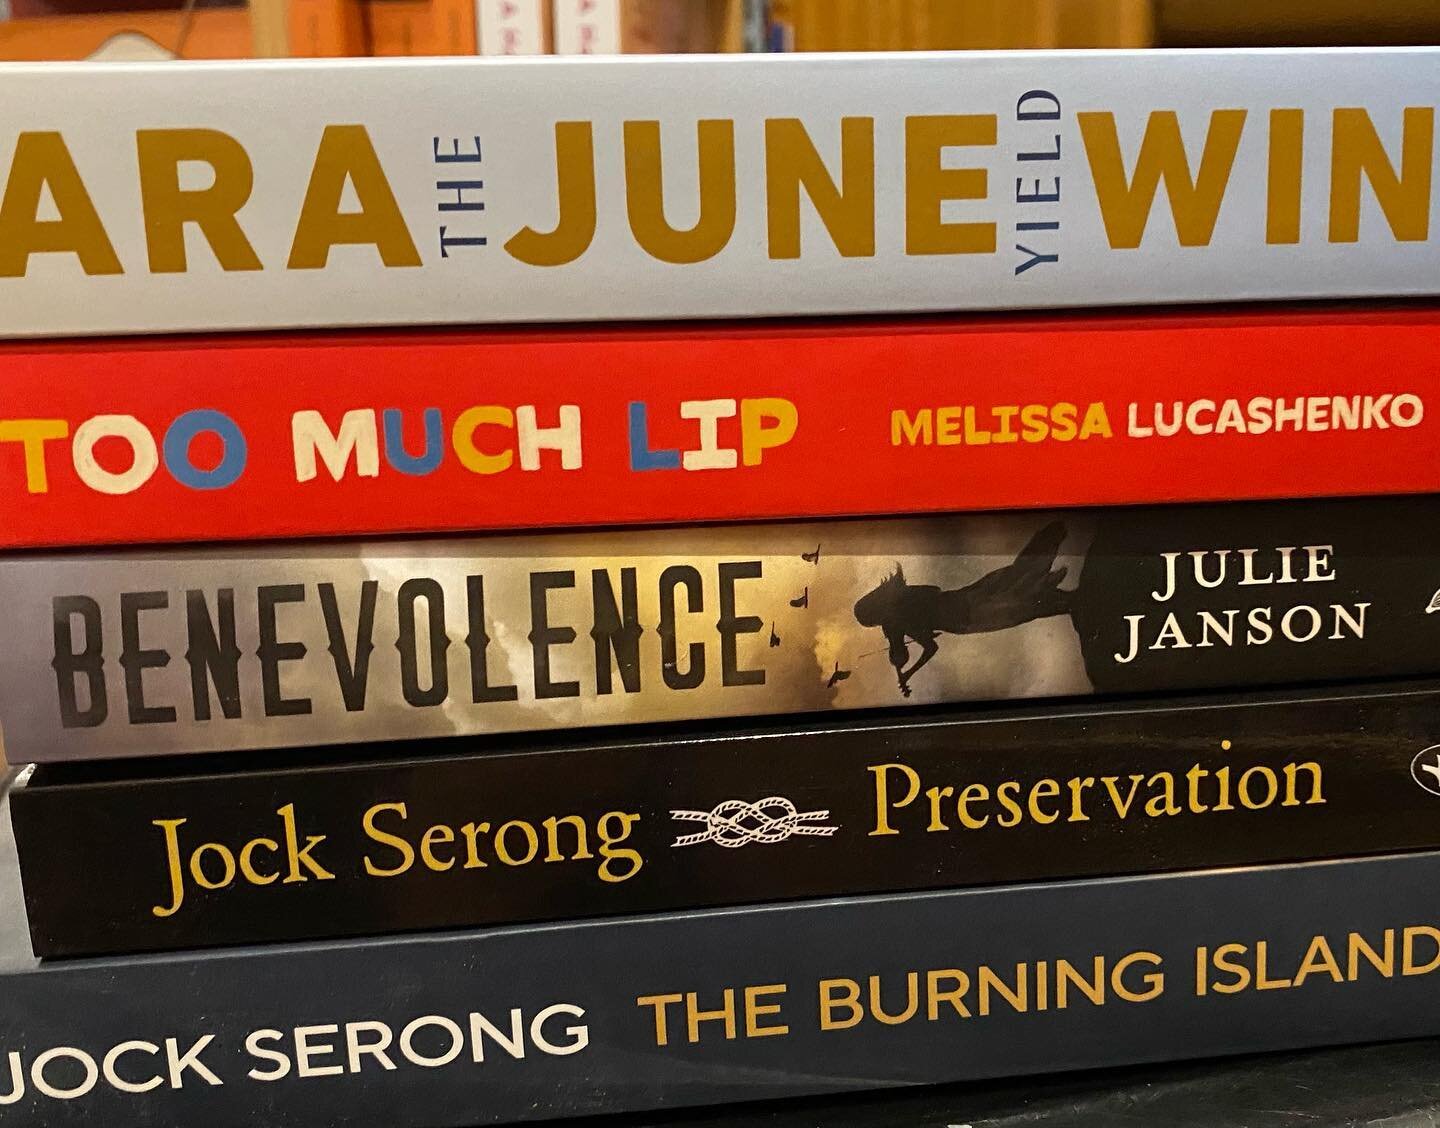 these incredible books &amp; authors have changed me like literally changed my chemical composition and how I feel walking - the first 3 all written by First Nation women are simply brilliant @blackfulla_bookclub @ulurustatement @thebookroomcollectiv